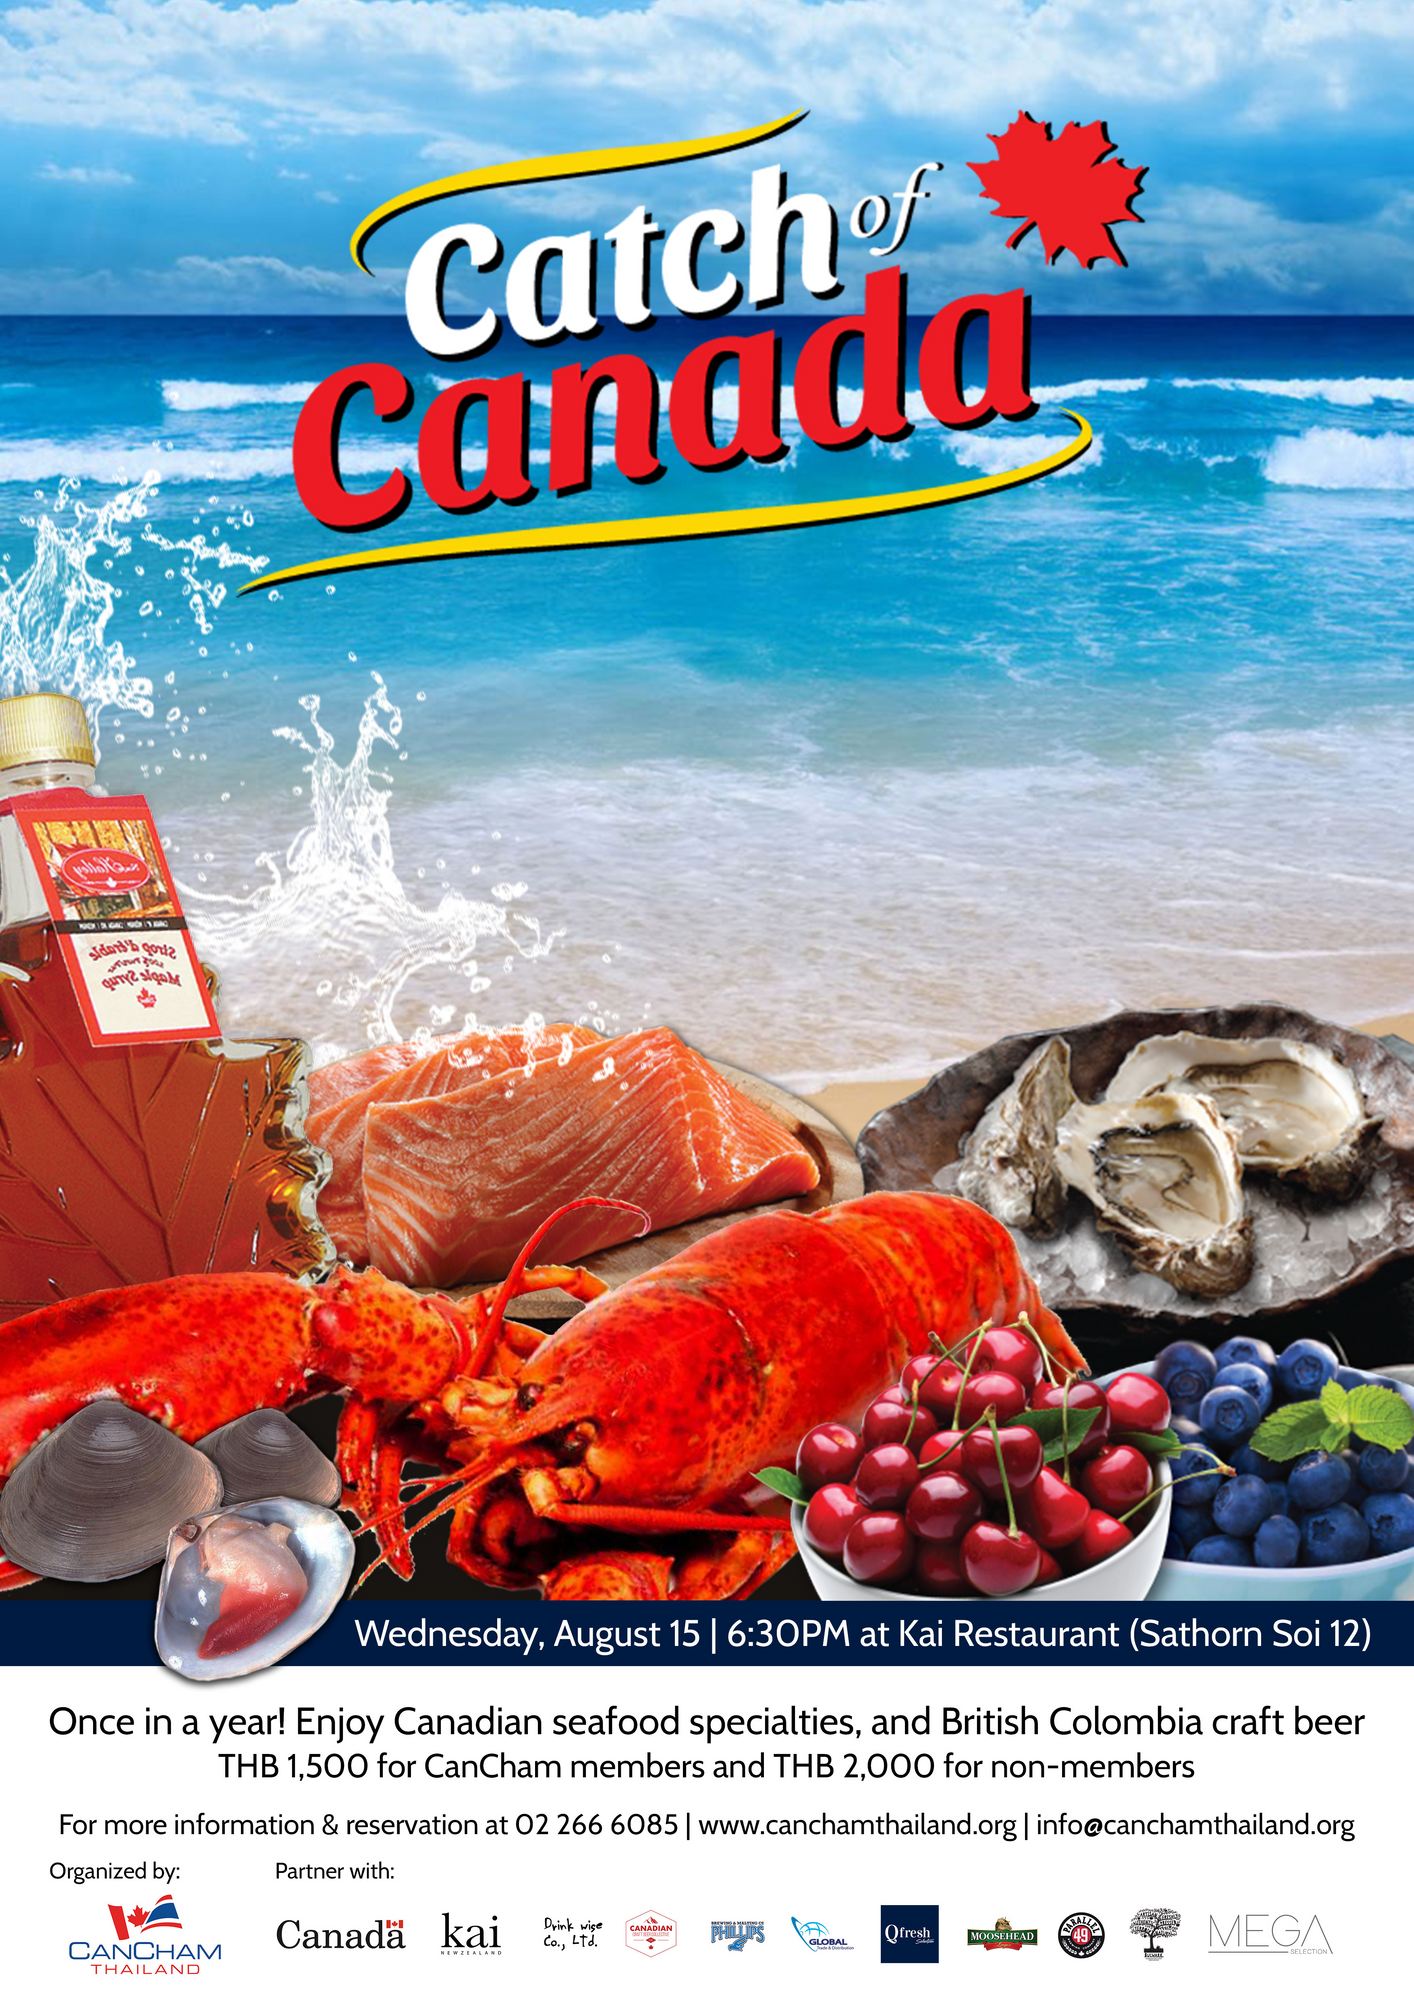 Catch of Canada - Cancham Annual Seafood Extravaganza